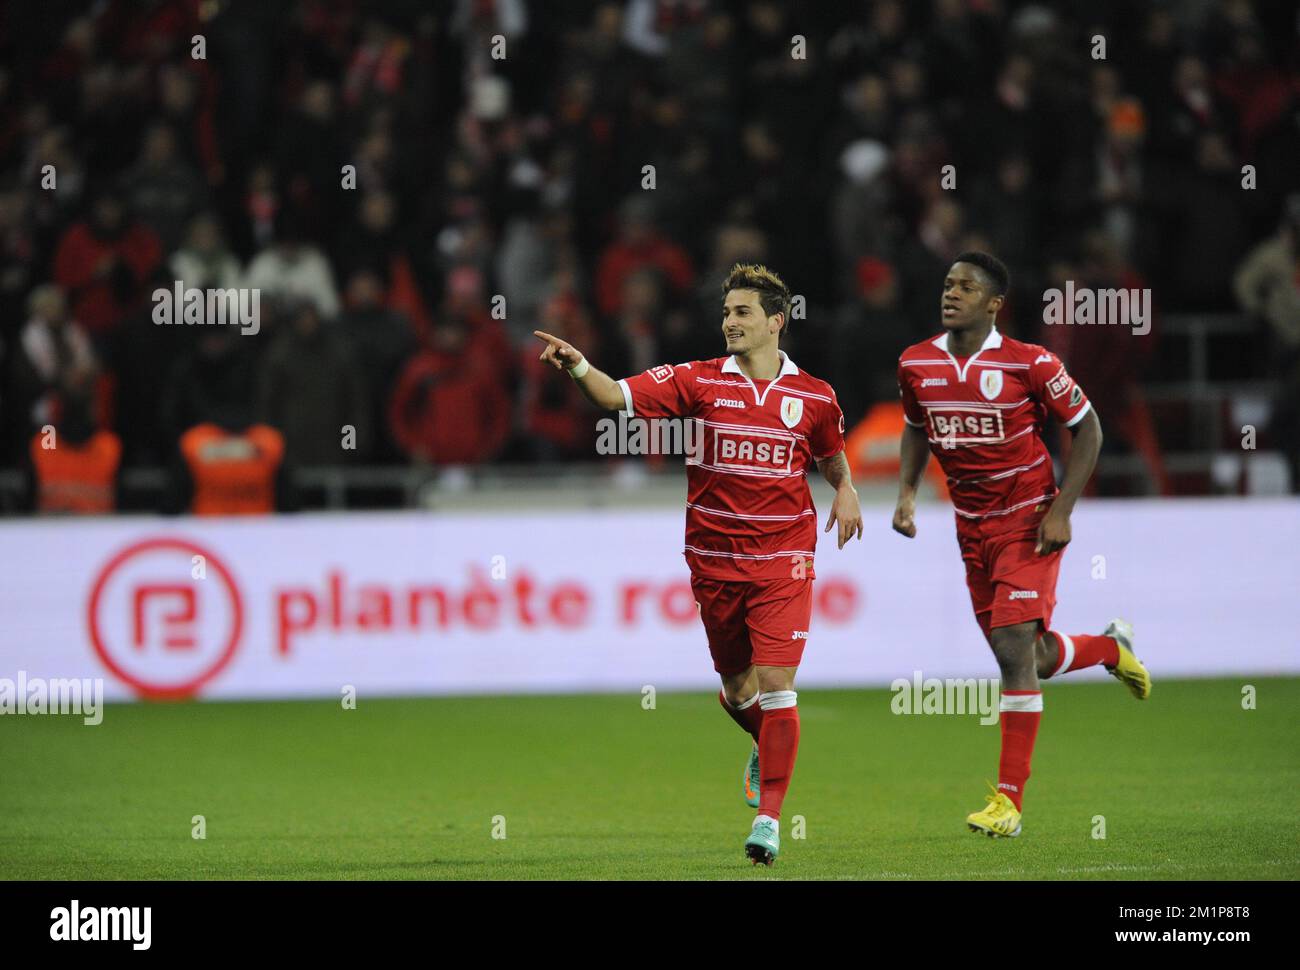 20121207 - LIEGE, BELGIUM: Standard's Maor Bar Buzaglo (C) celebrates after scoring the 3-0 goal during the Jupiler Pro League match between Standard and Charleroi, in Liege, Friday 07 December 2012, on day 19 of the Belgian soccer championship. BELGA PHOTO JOHN THYS Stock Photo